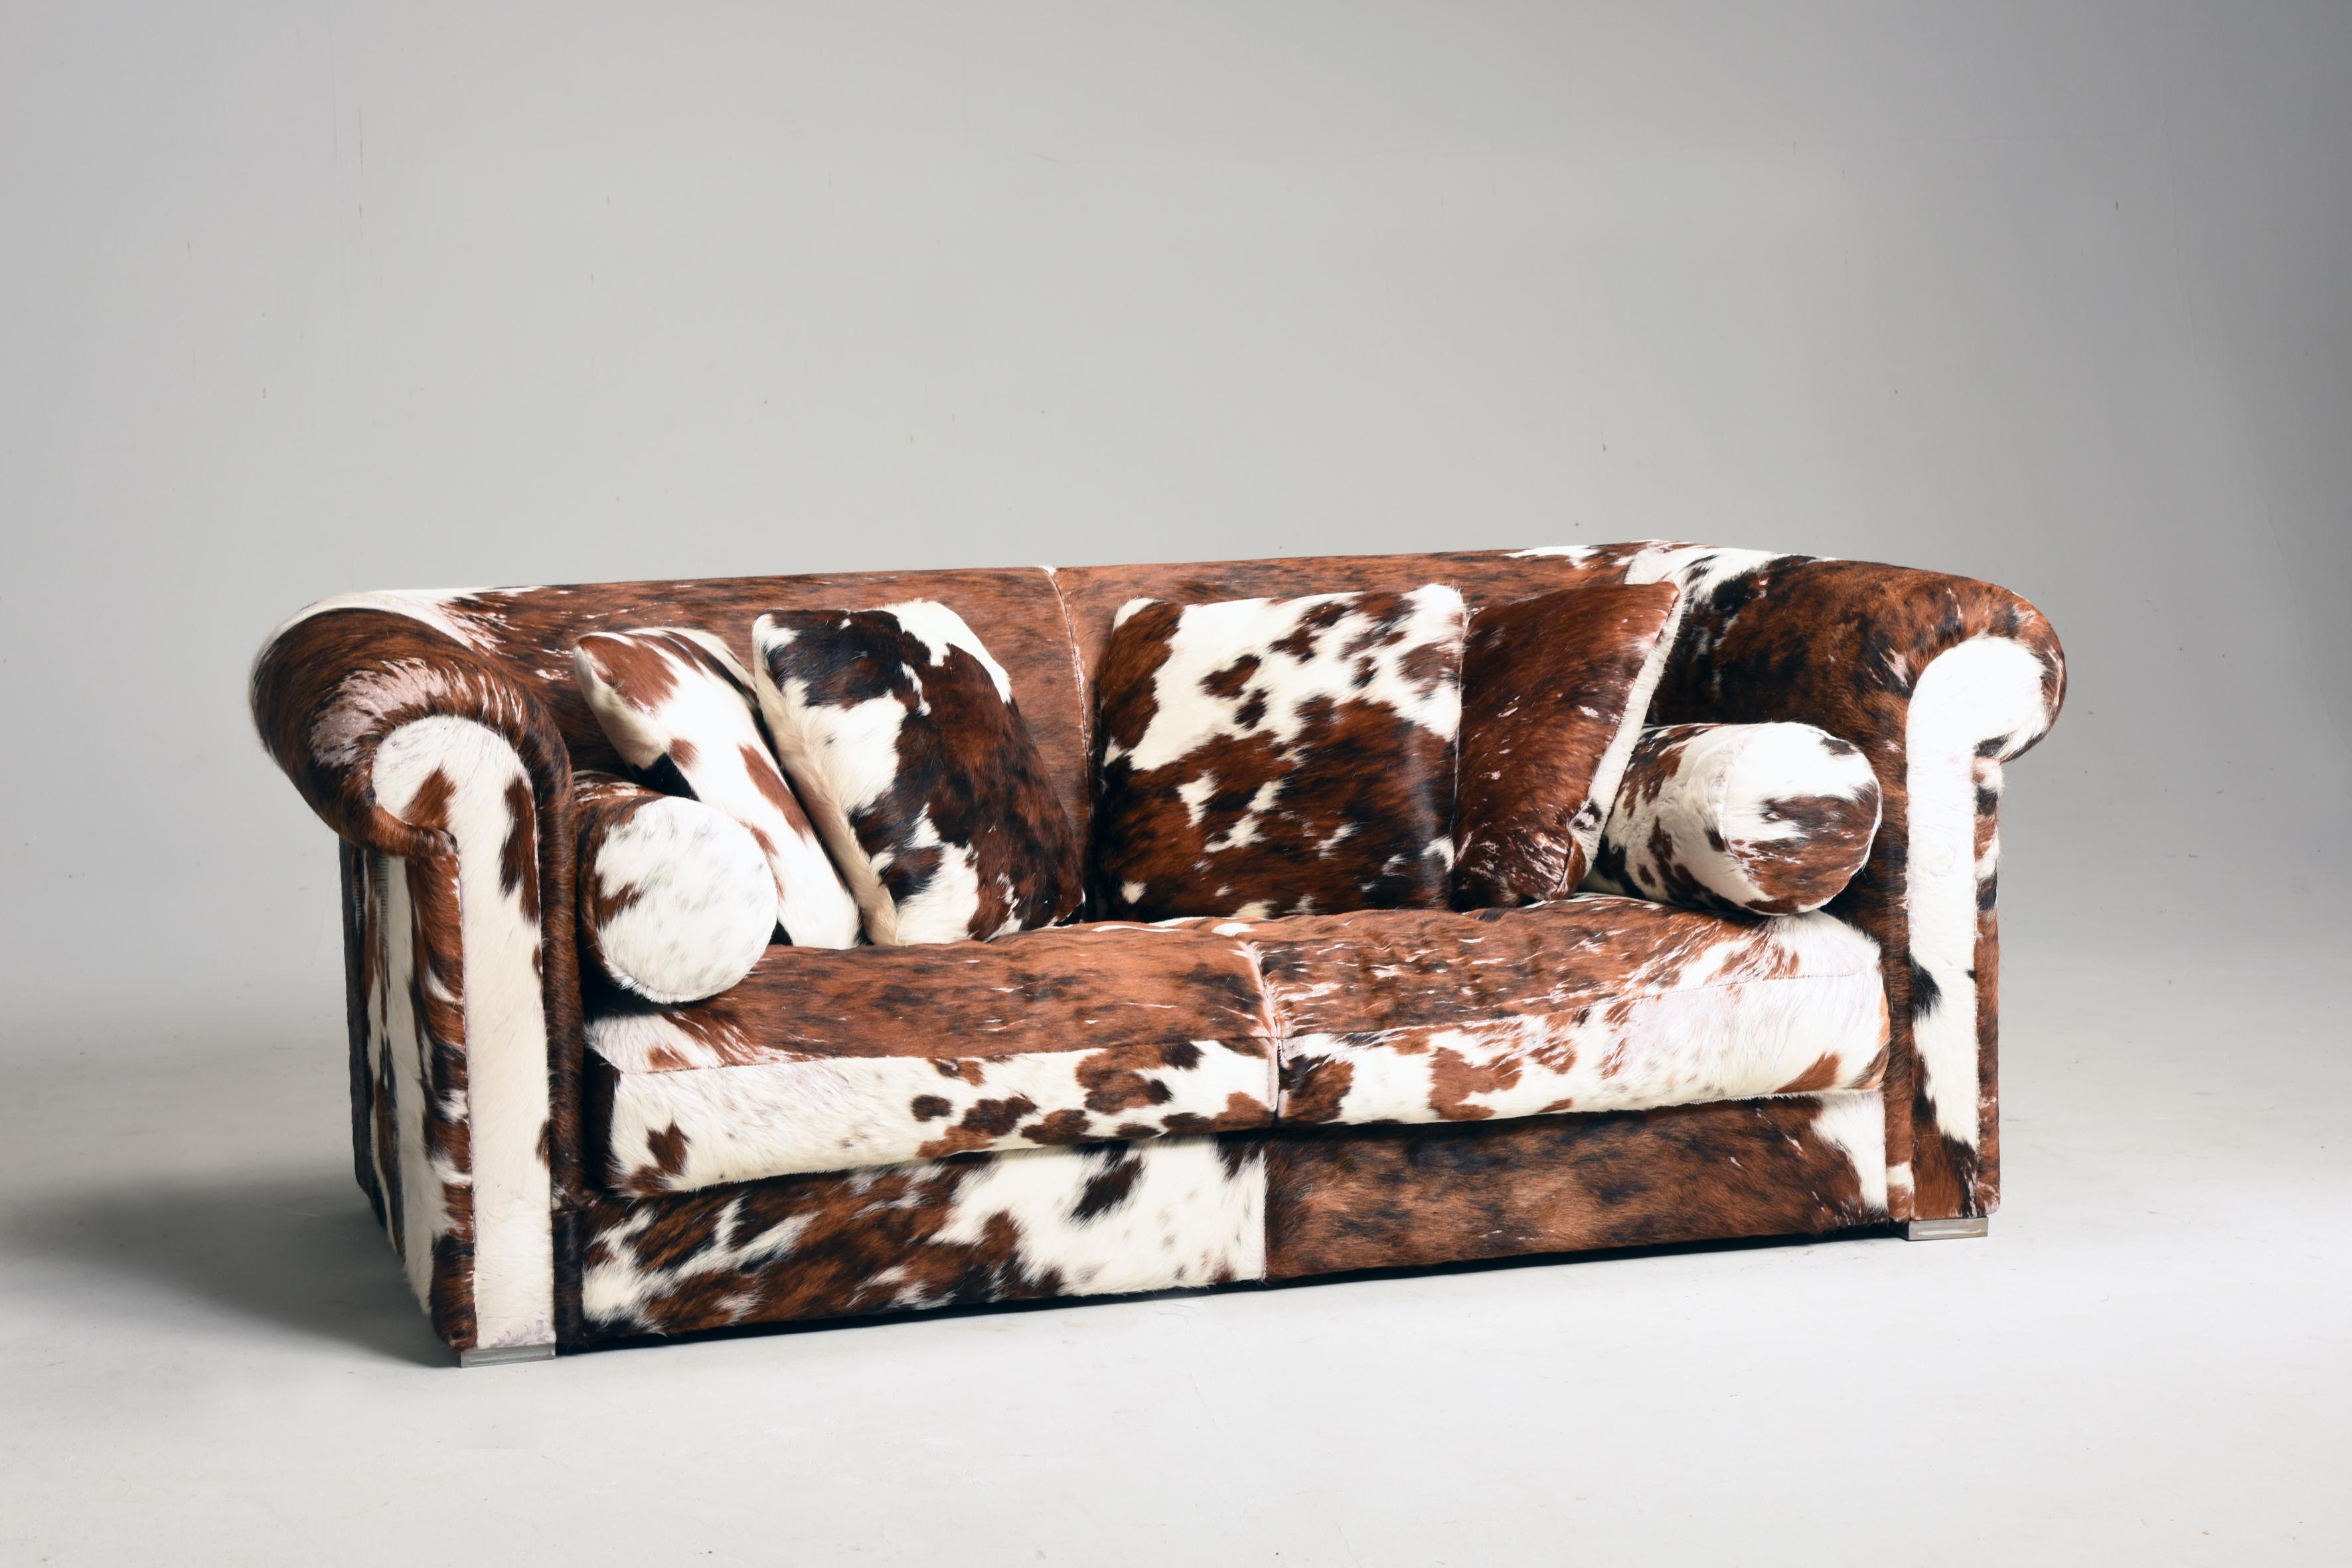 1990s Italian brown and white cow fur leather sofa and pillows by Baxter. The sofa comes with a set of pillows squared and tubular shaped. They all are upholstered with cow fur leather brown and white color. This kind of sofa is ideal in a very